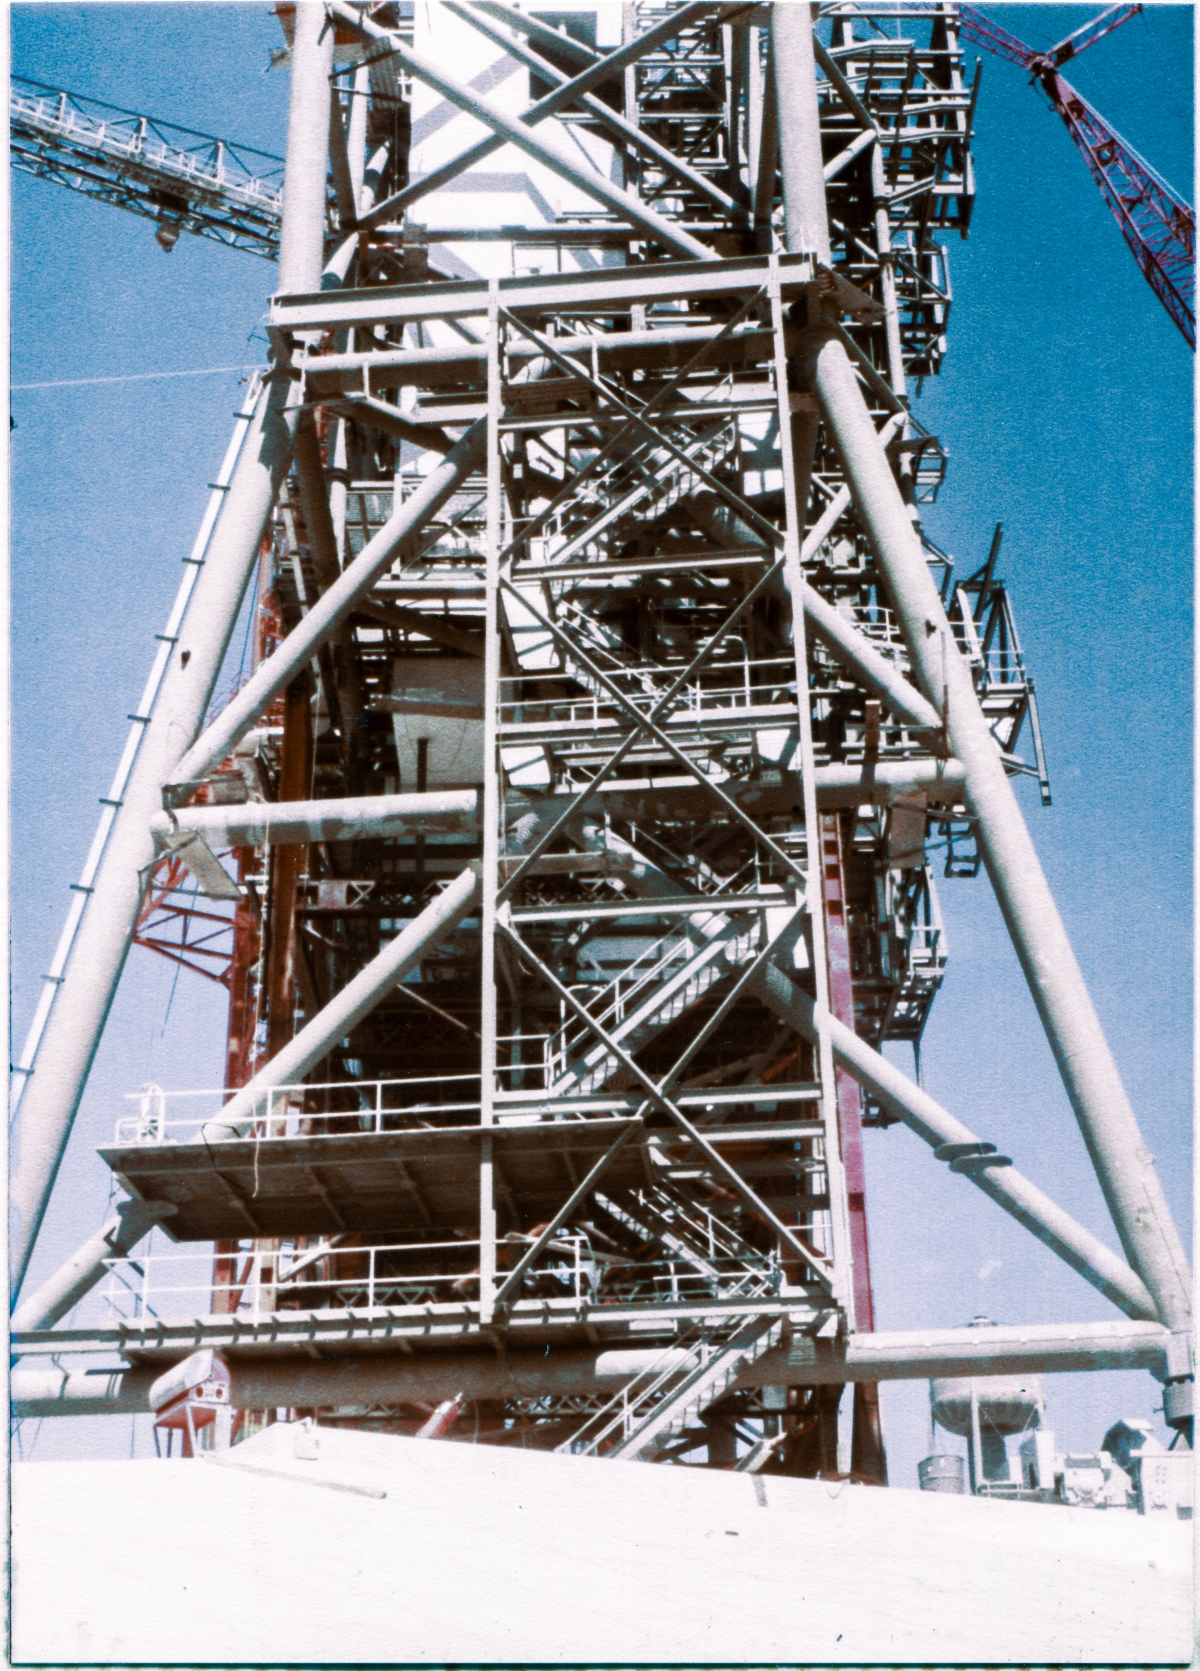 Image 017. From a vantage point roughly half-way down the west margin of the Pad Slope, south of the towers at Space Shuttle Launch Complex 39-B, Kennedy Space Center, Florida, you are looking back up at the Rotating Service Structure at its far end, Column Line 7. Construction was ongoing at this time, and the RSS was still partially-supported on falsework, but the main elements of the structure as it was originally designed are mostly in-place at this time. Photo by James MacLaren.